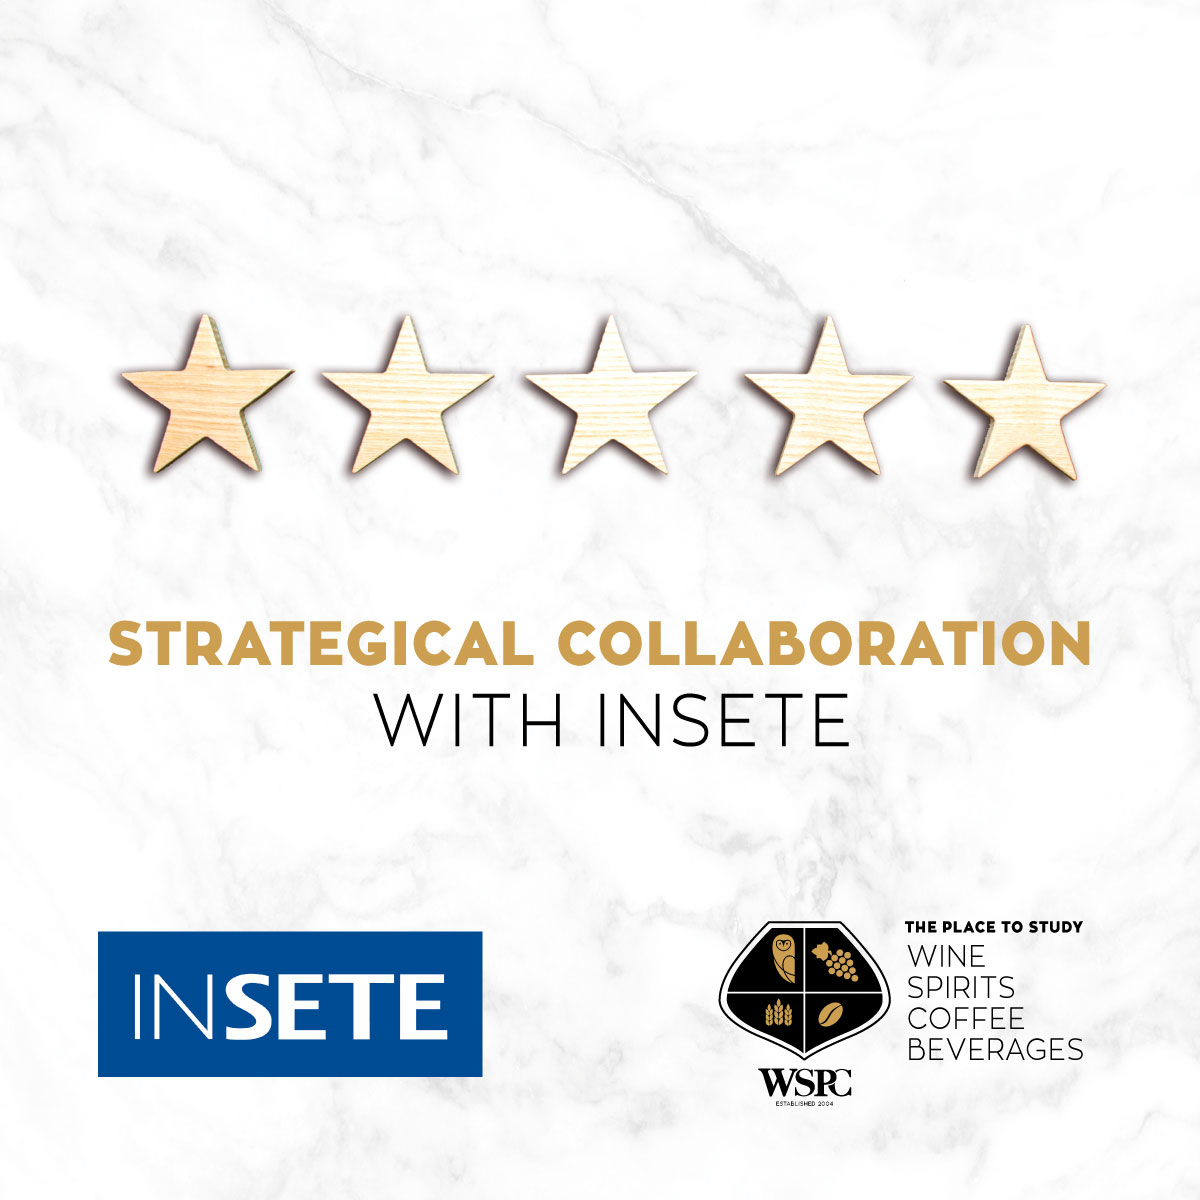 Strategical Collaboration with INSETE